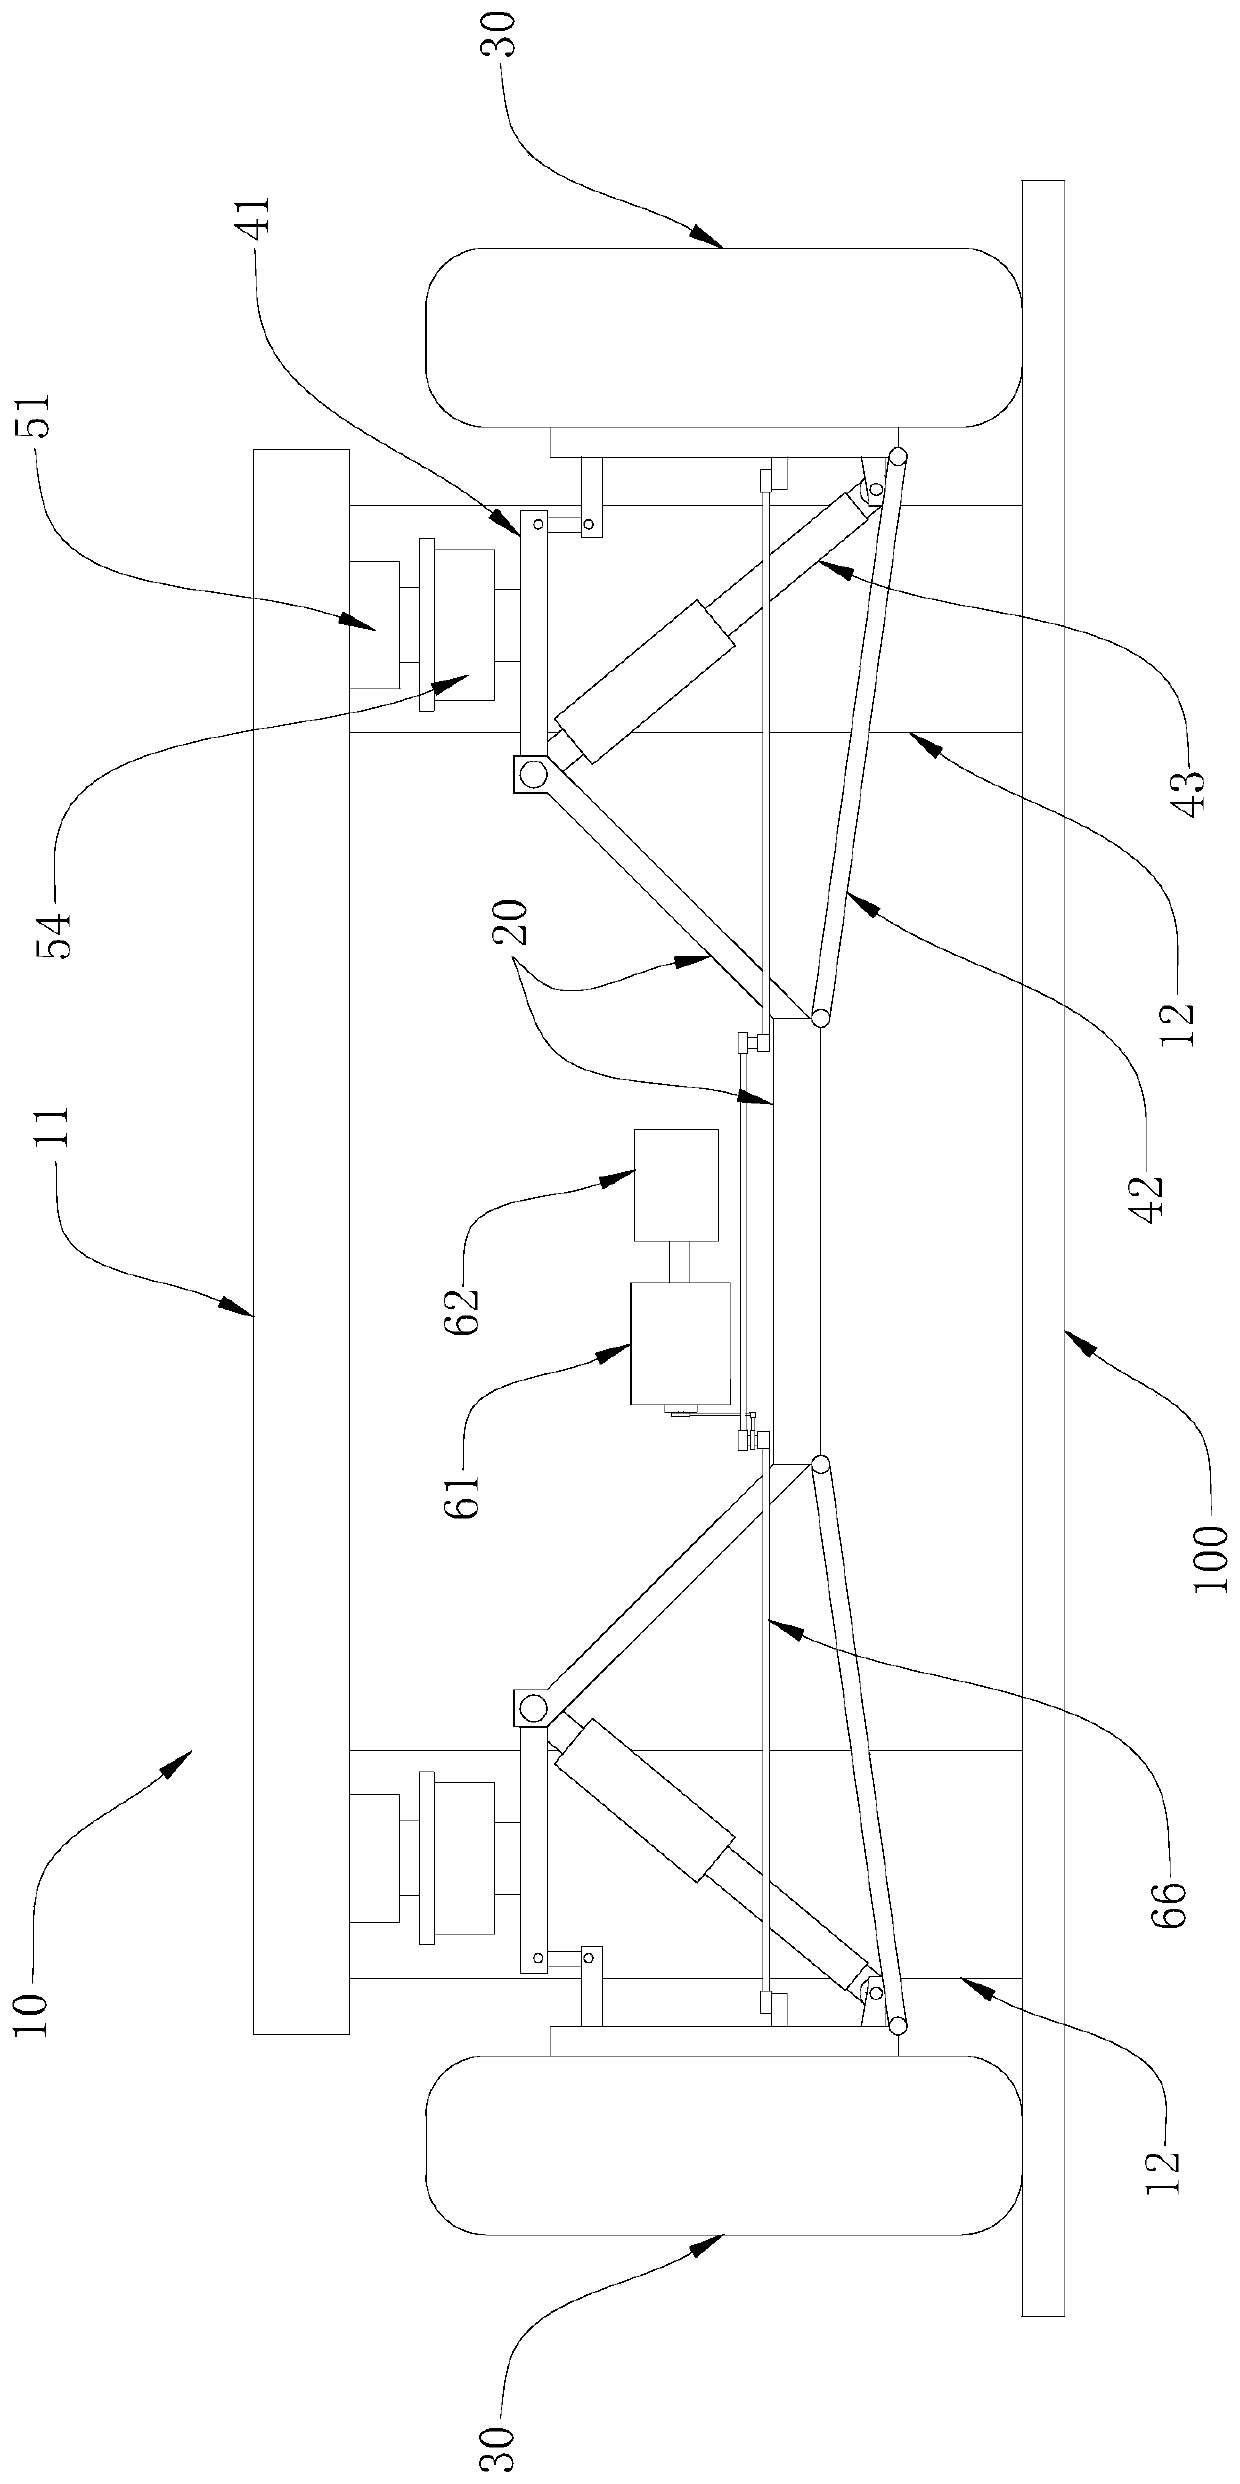 Steering-by-wire system experimental device